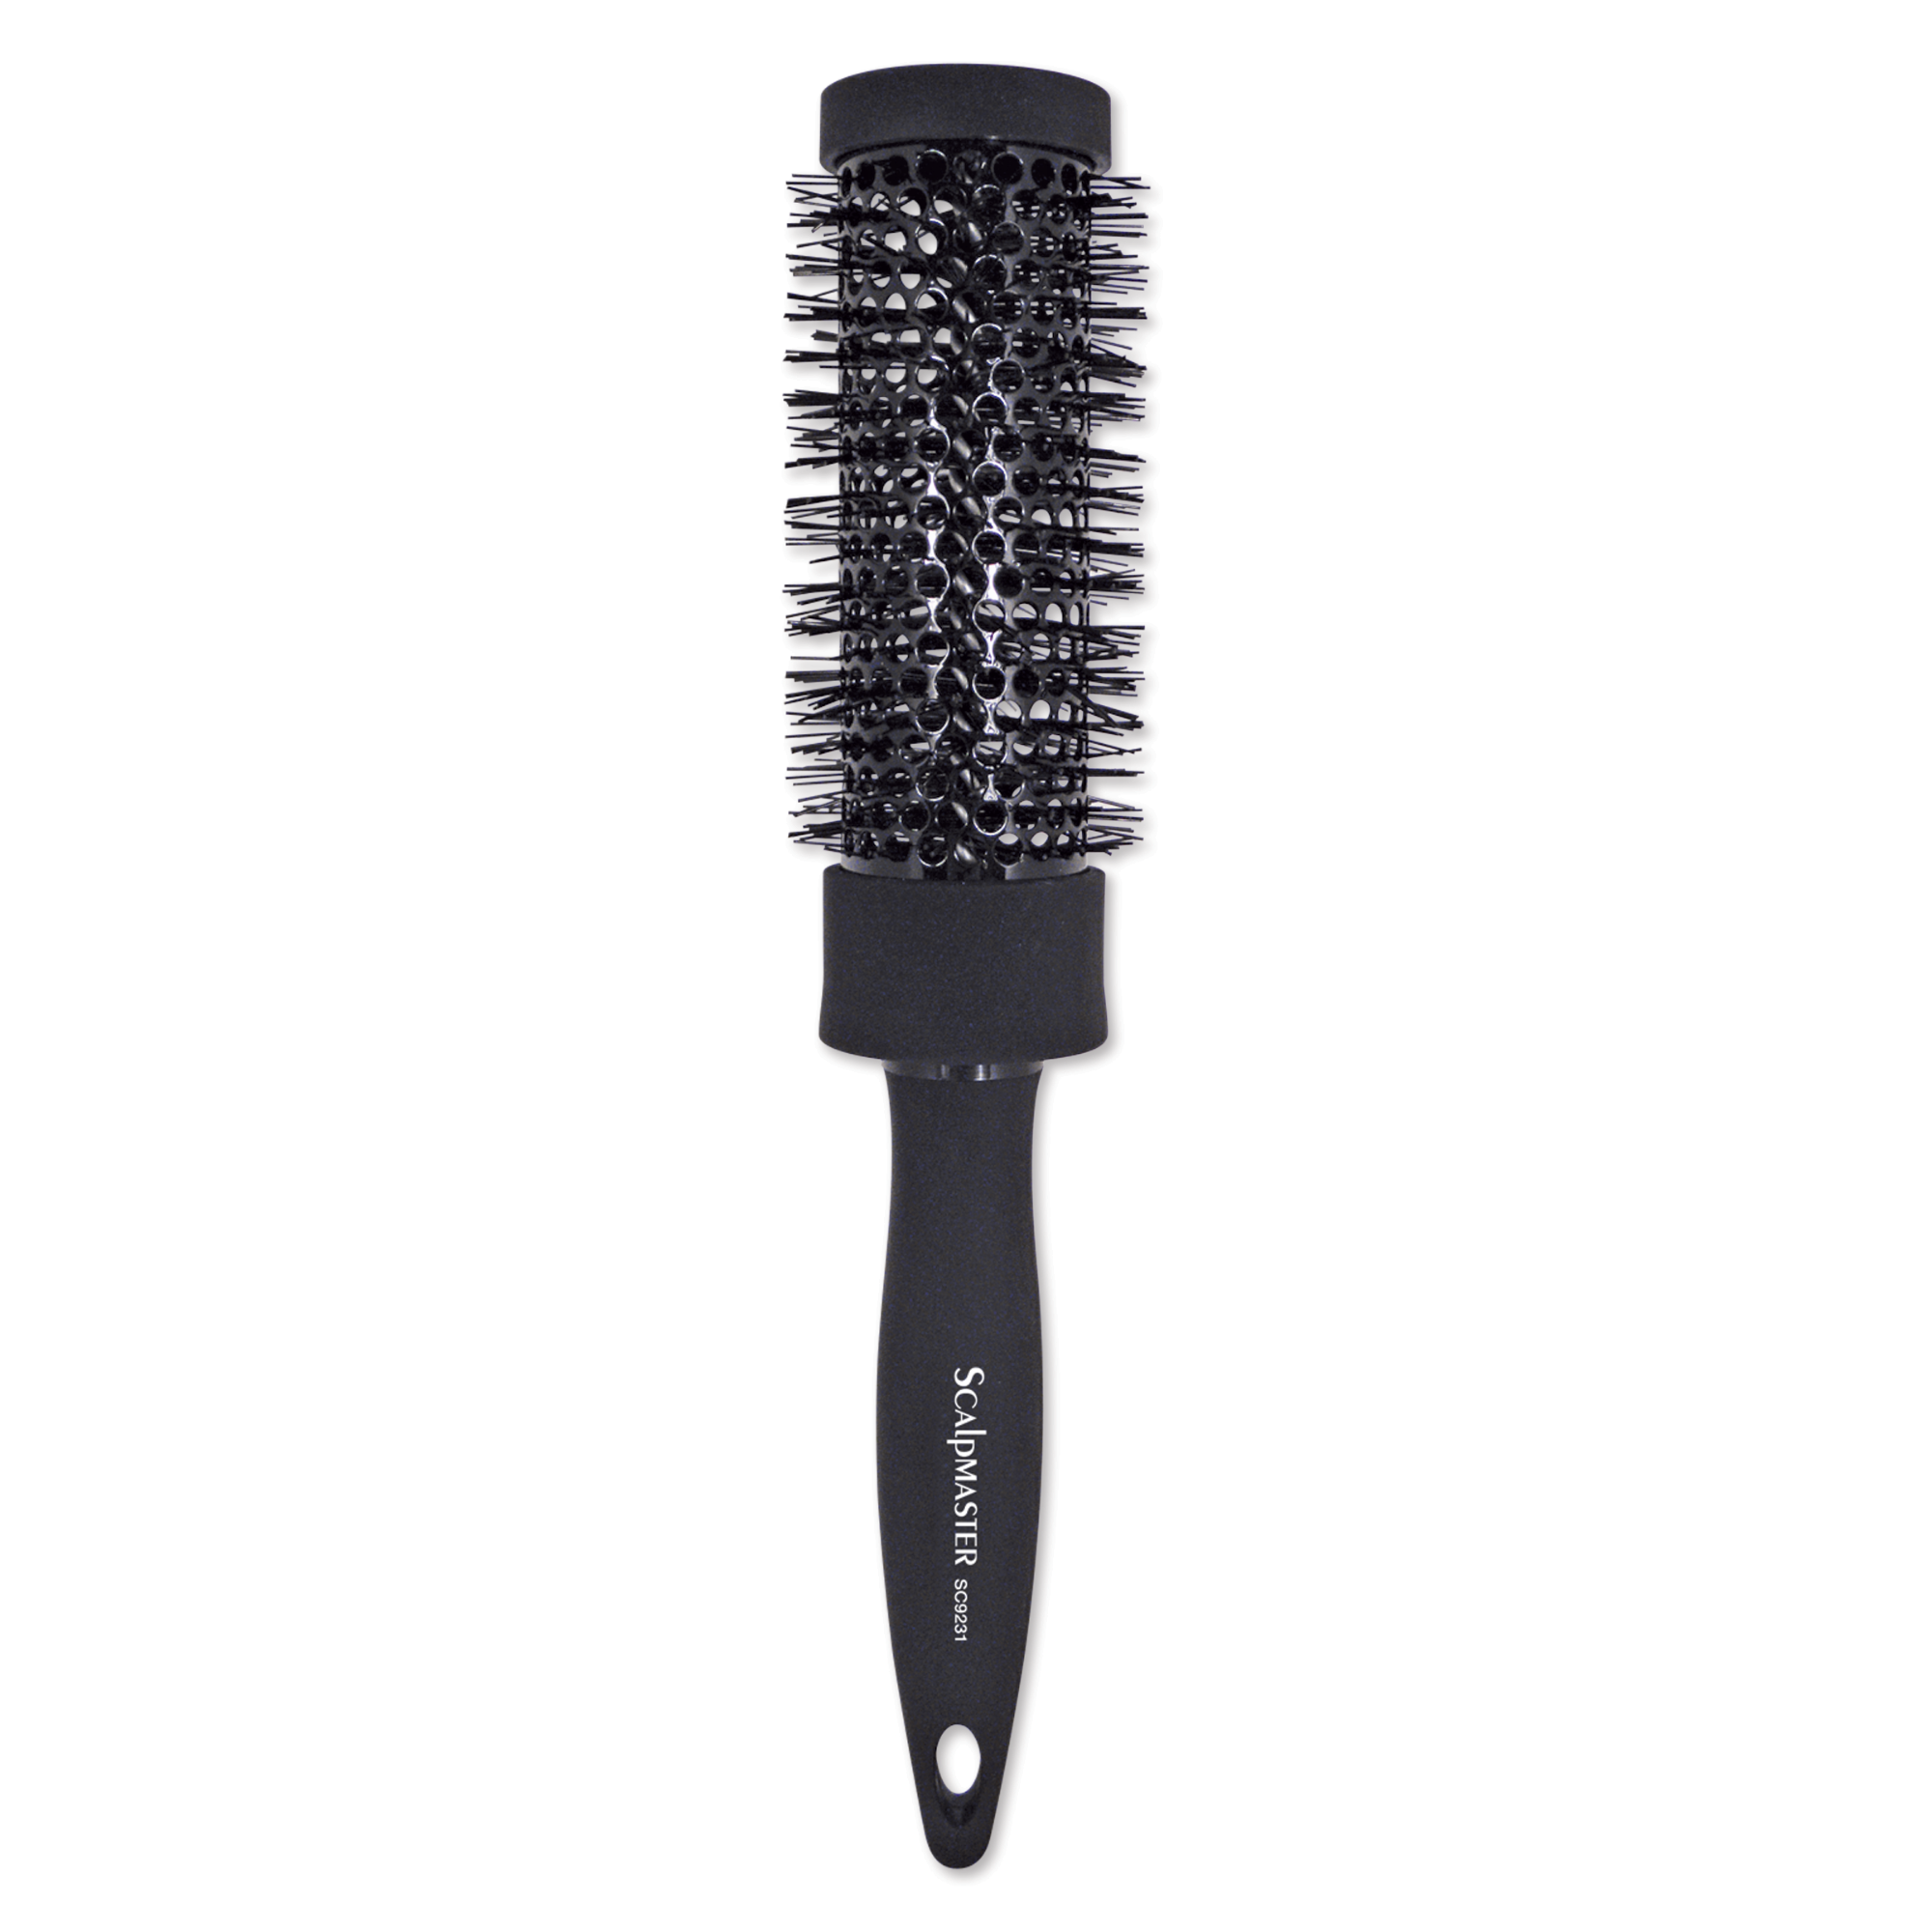 Thermal Round Brush with Rubberized Handle - 1-3/4"